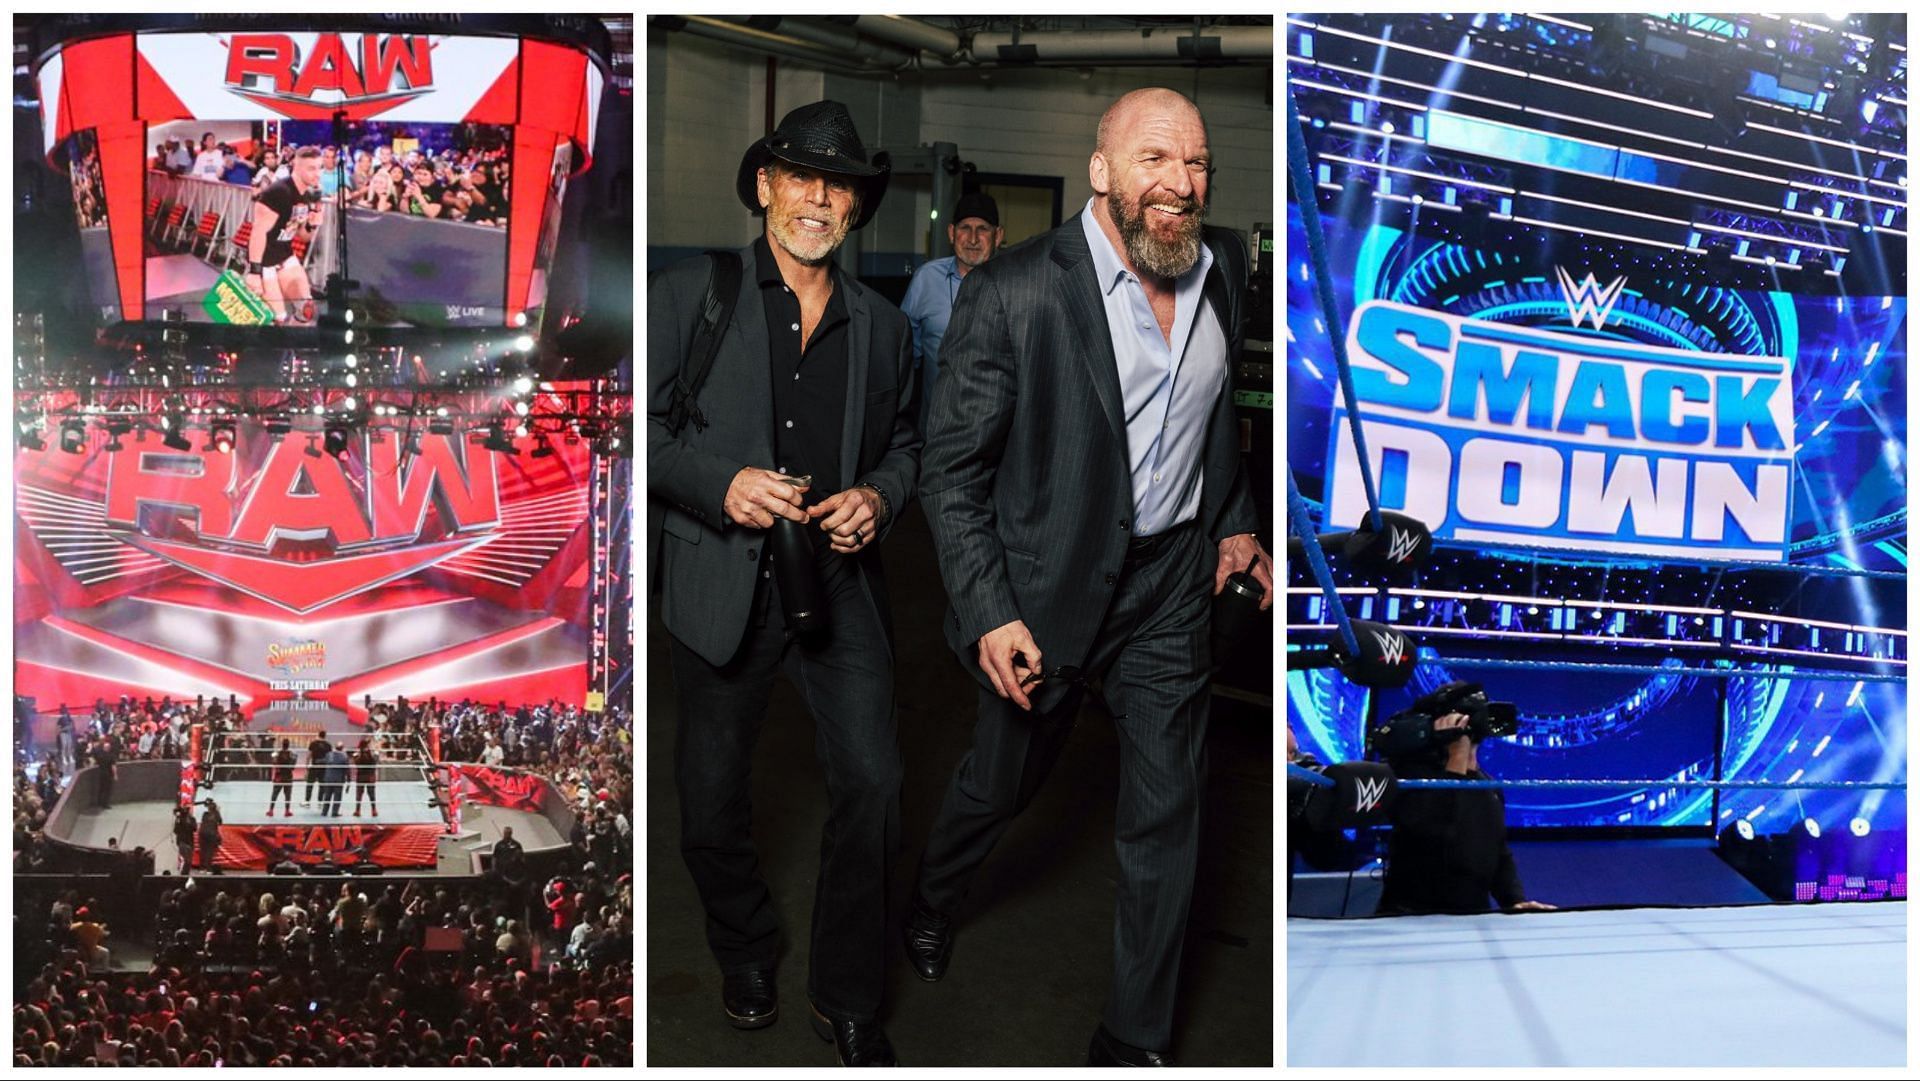 The WWE RAW stage, Triple H and Shawn Michaels arrive backstage, the WWE SmackDown stage